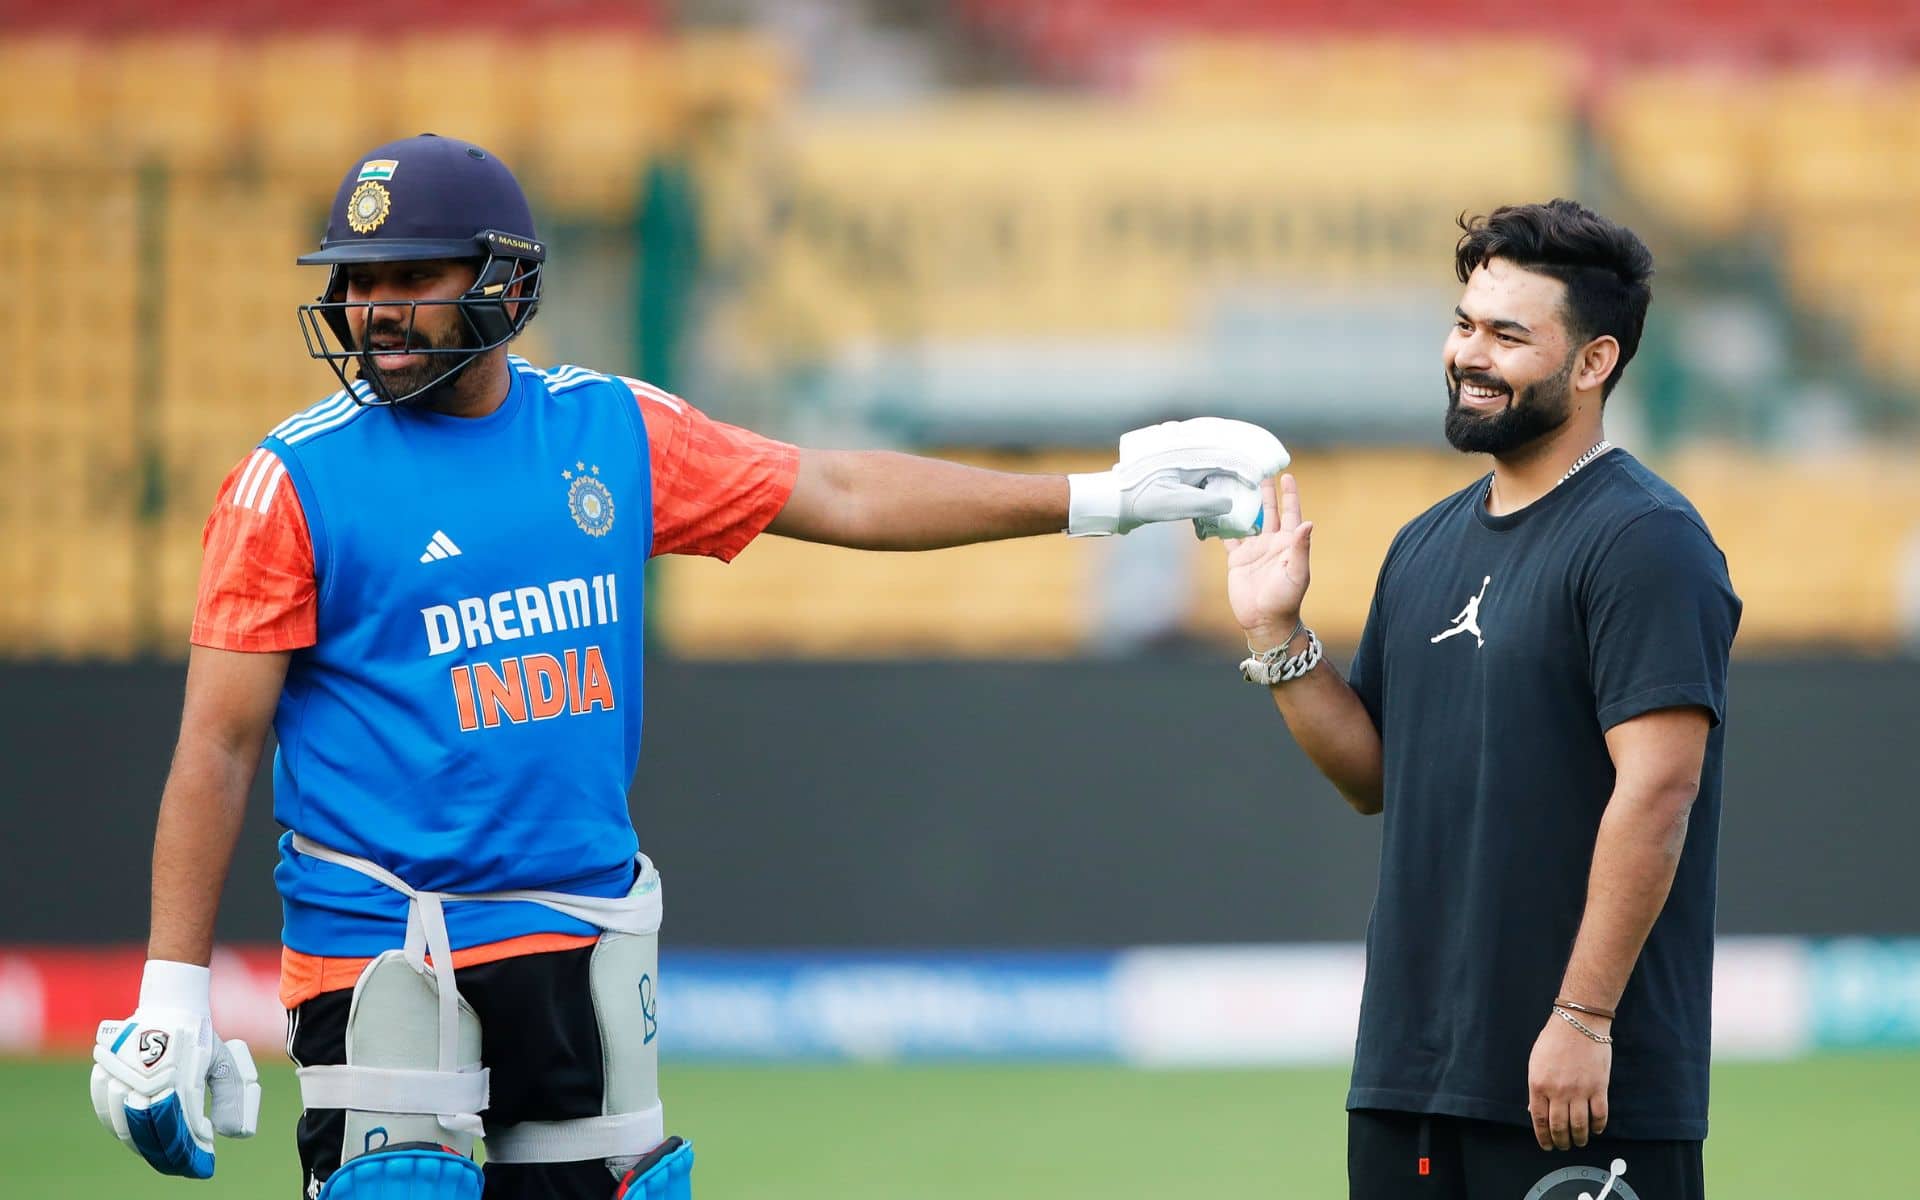 Rohit Sharma having fun with Rishabh Pant in IND net session (X.com)